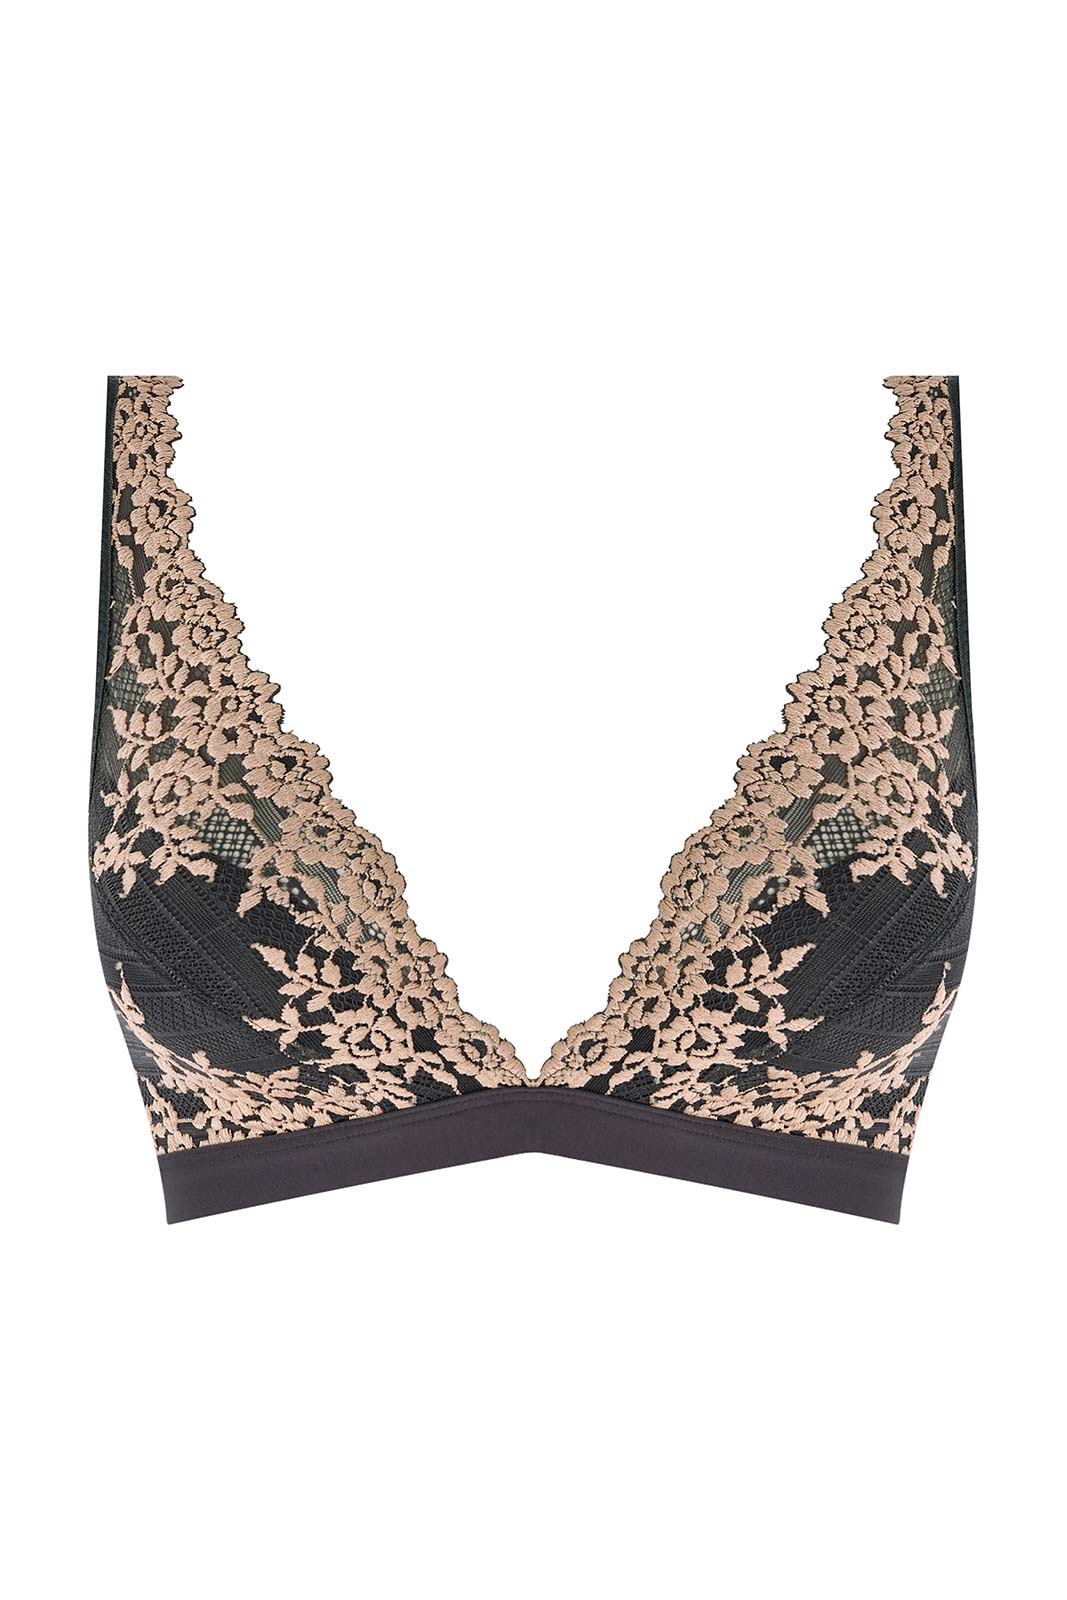 Wacoal Embrace Lace Soft Cup Bra - Lily Whyte Lingerie